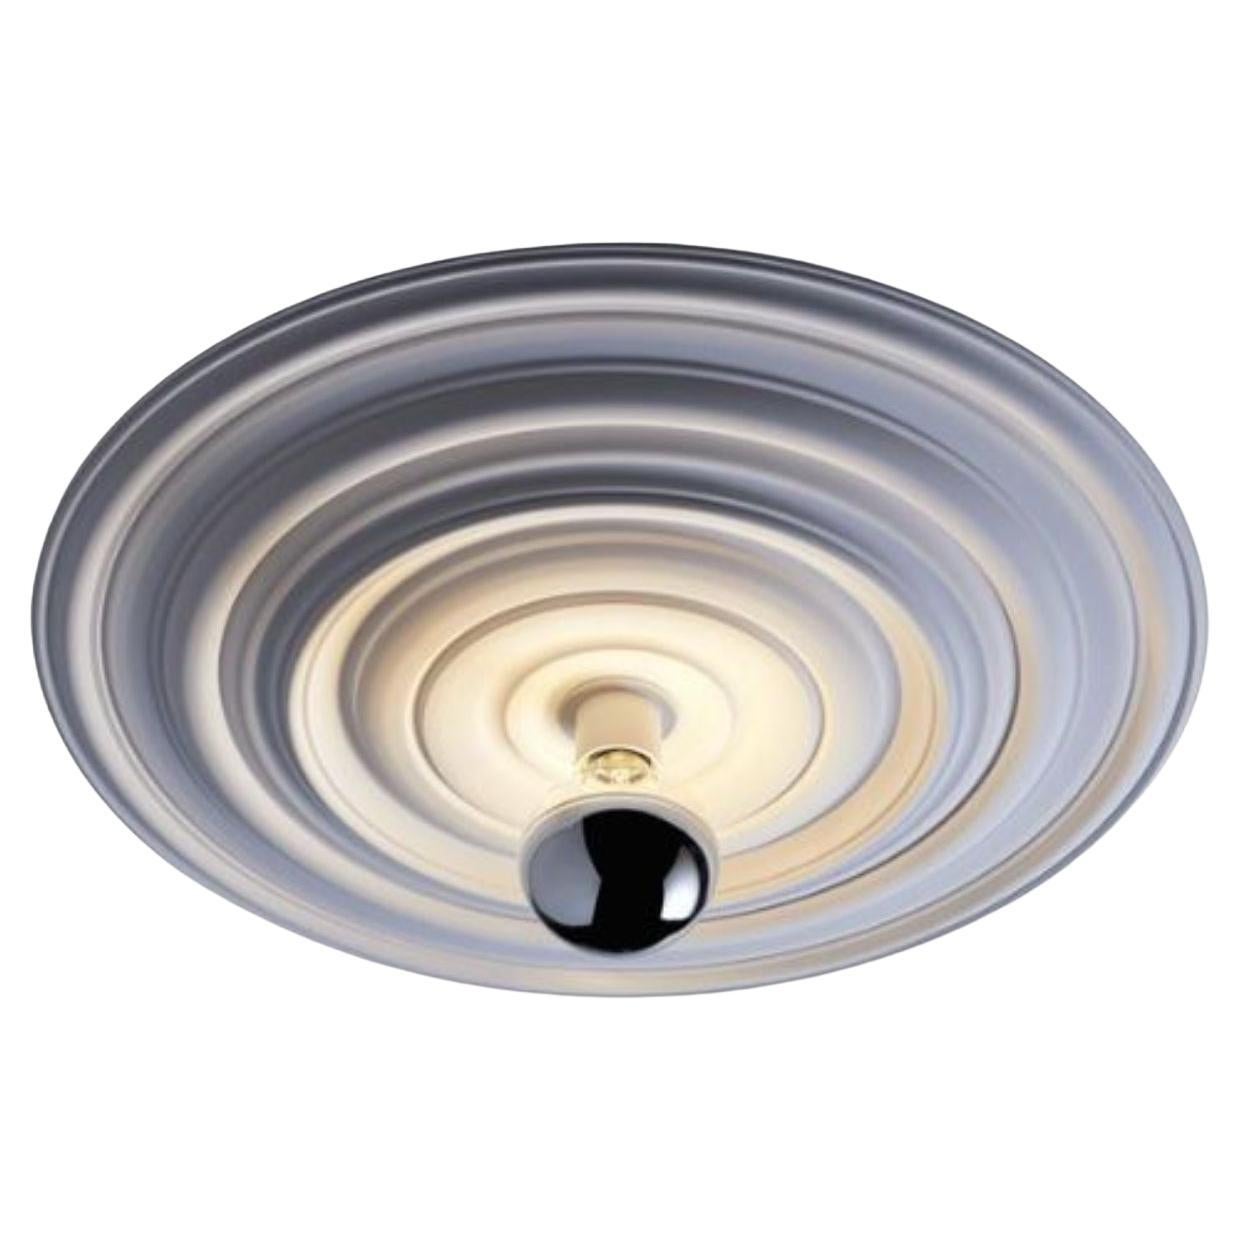 Large Odeon Ceiling Light by Radar For Sale